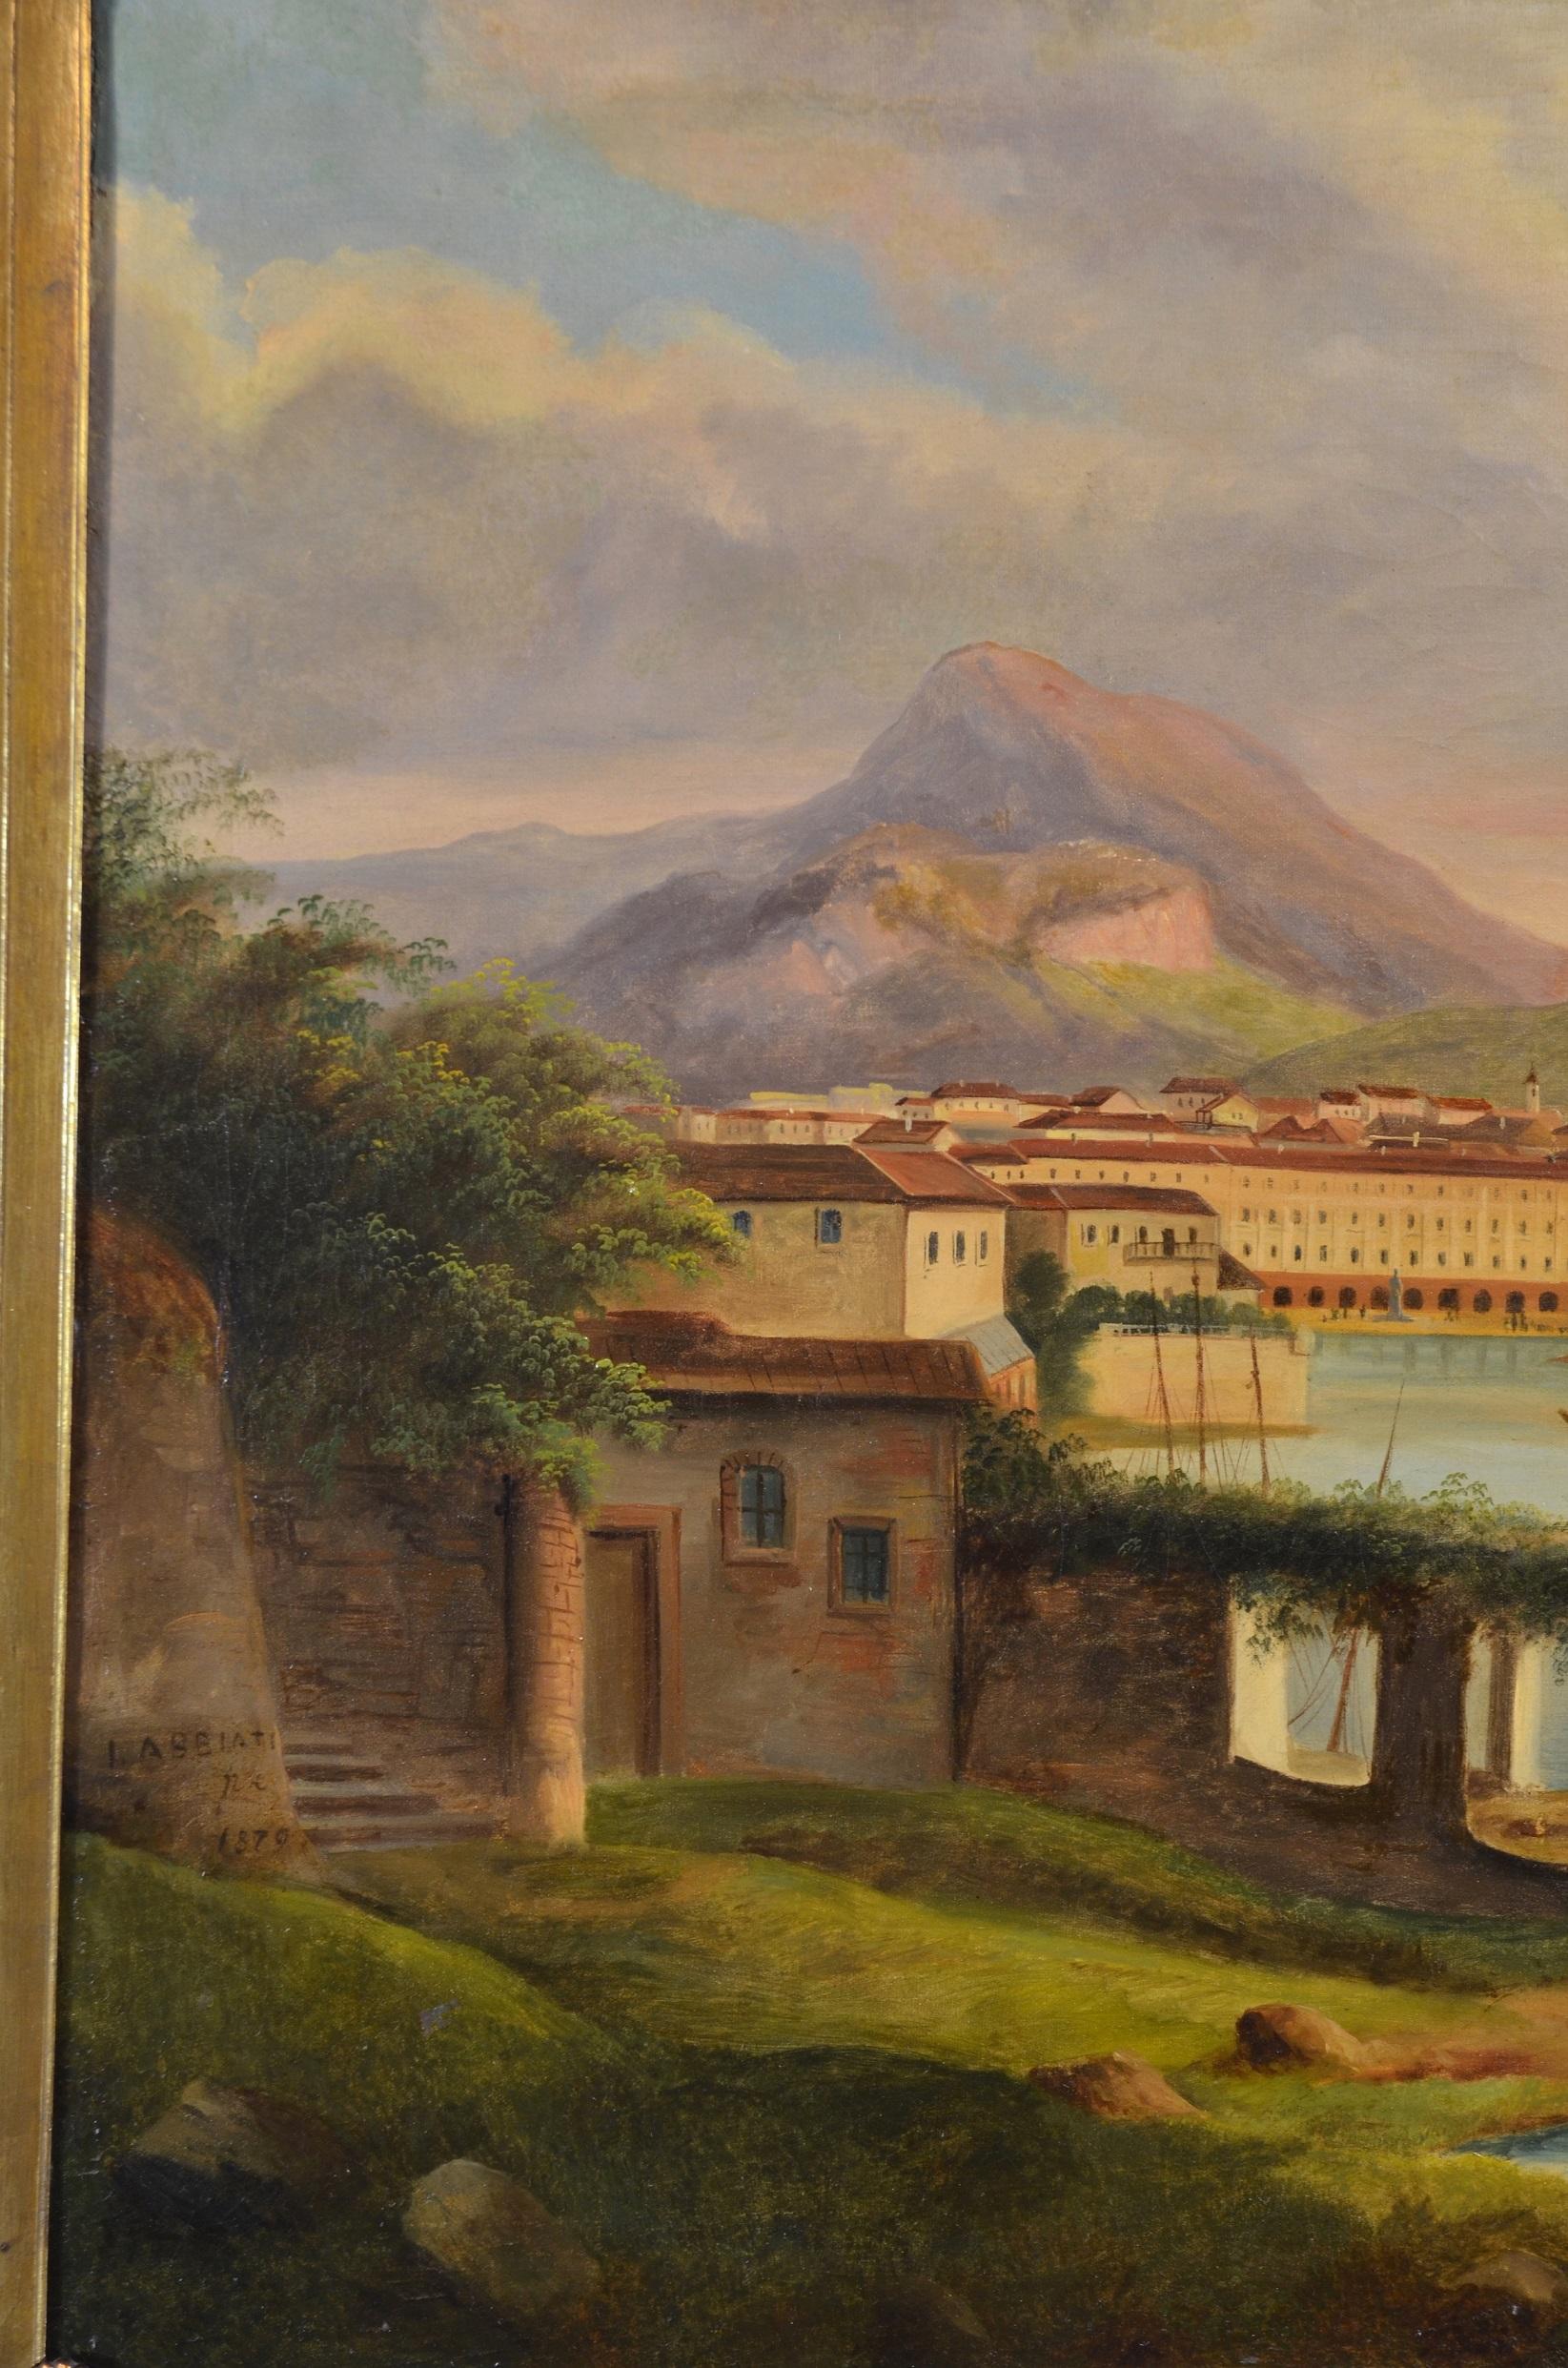 View of Riva del Garda
Landscape painter of the nineteenth century

Second half of the 19th century
oil on canvas, 98 x 135 cm
with frame cm. 76 x 111

The landscape in question represents an evocative view of Riva del Garda, a town located in the